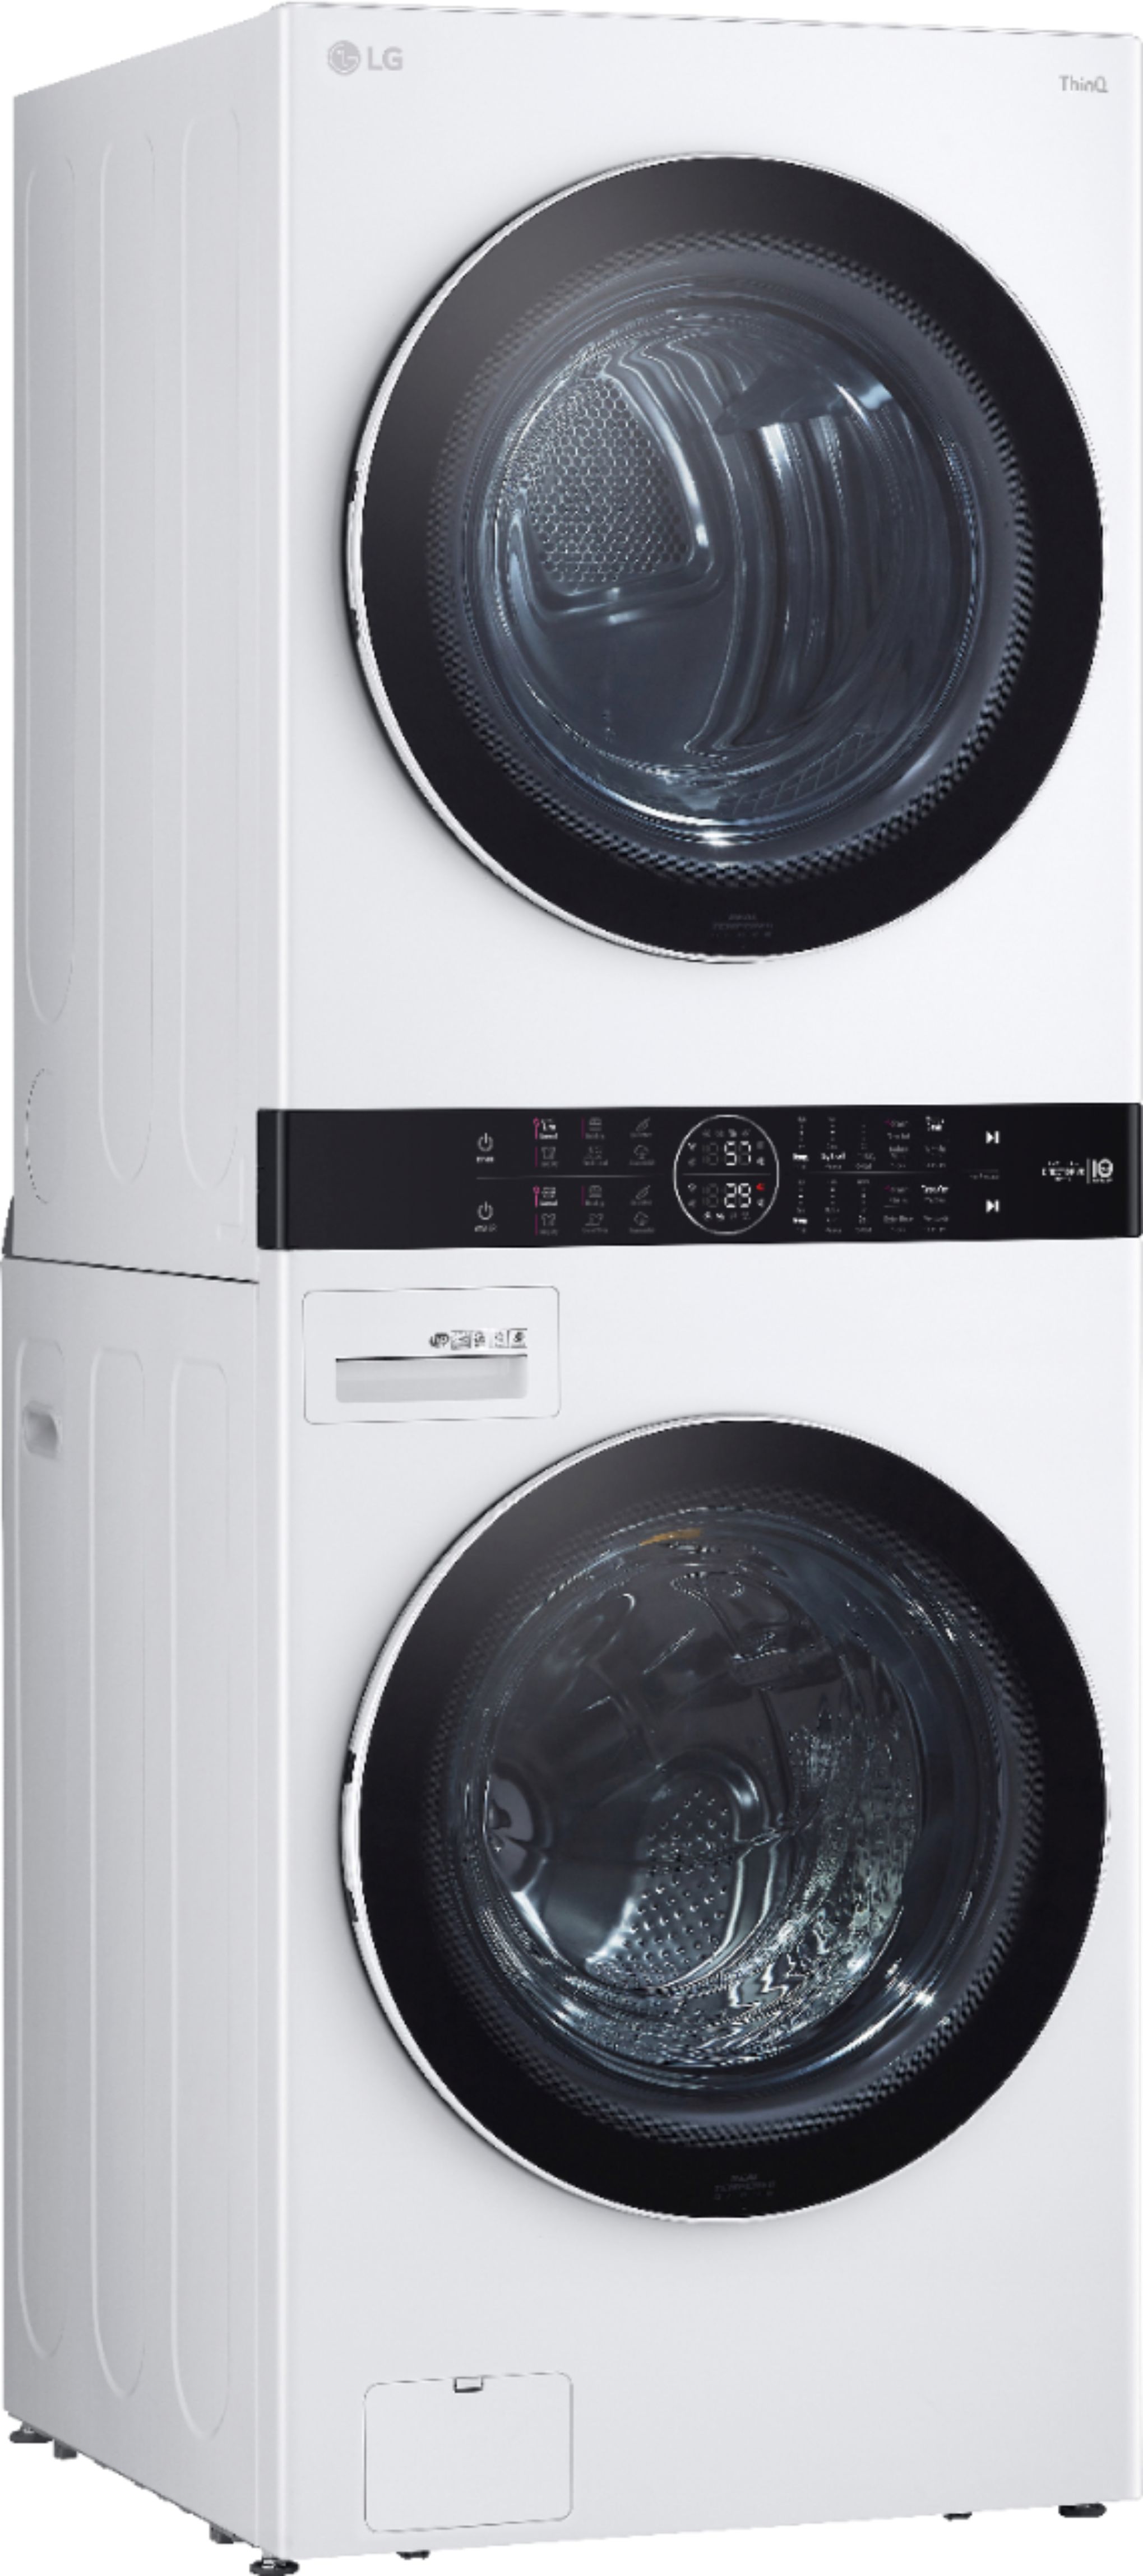 Angle View: LG - 4.5 Cu. Ft. HE Smart Front Load Washer and 7.4 Cu. Ft. Gas Dryer WashTower with Steam and Built-In Intelligence - White